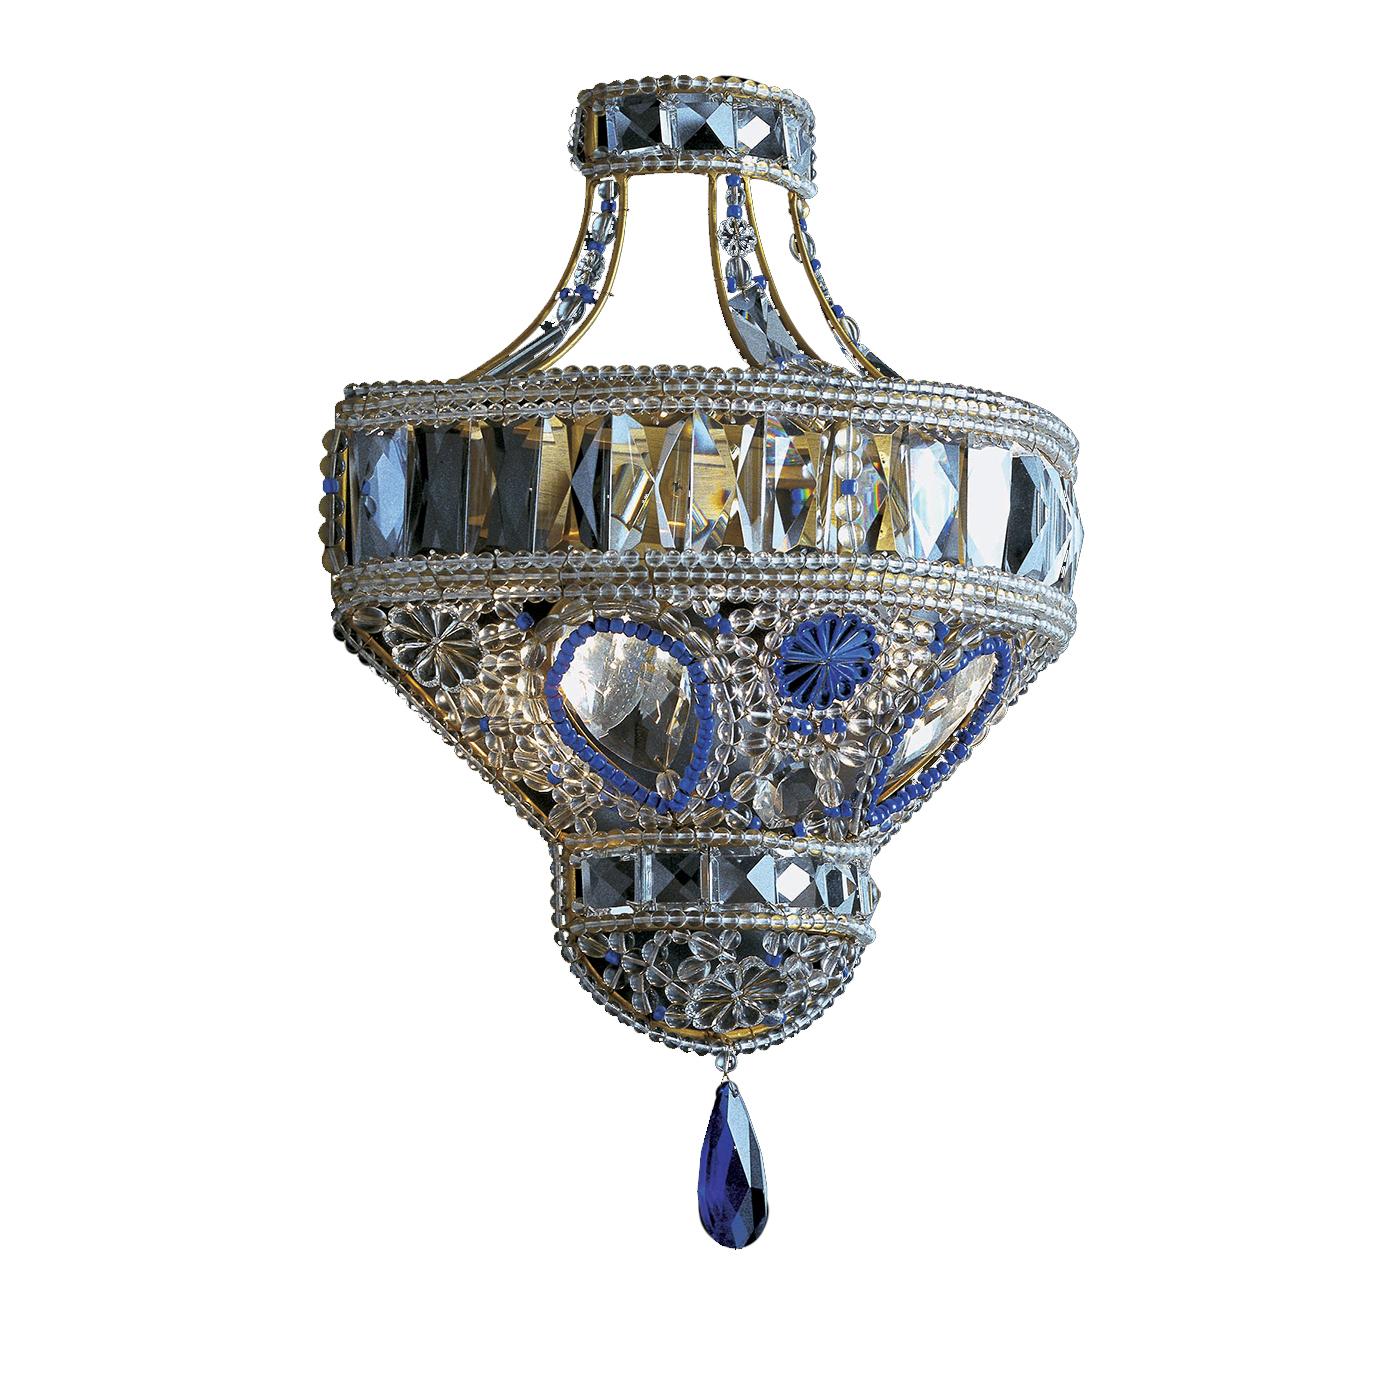 A delicate design crafted with masterful expertise, this sconce will add a luxurious accent to a classic decor. Flanking a mirror in an entryway or used to illuminate a living room or a bedroom, this piece will sparkle thanks to the clear and blue